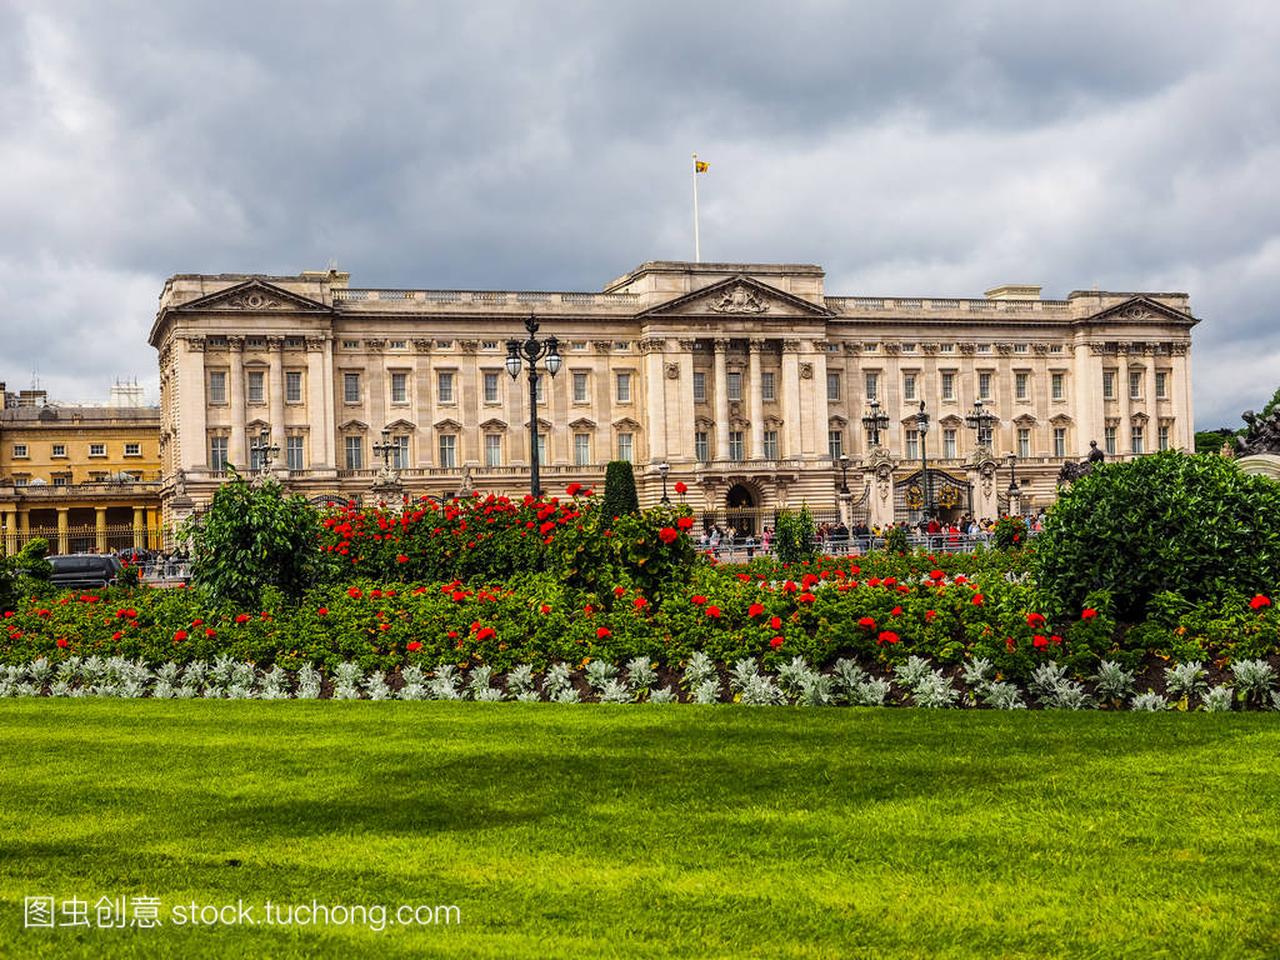 Buckingham Palace in London (hdr)